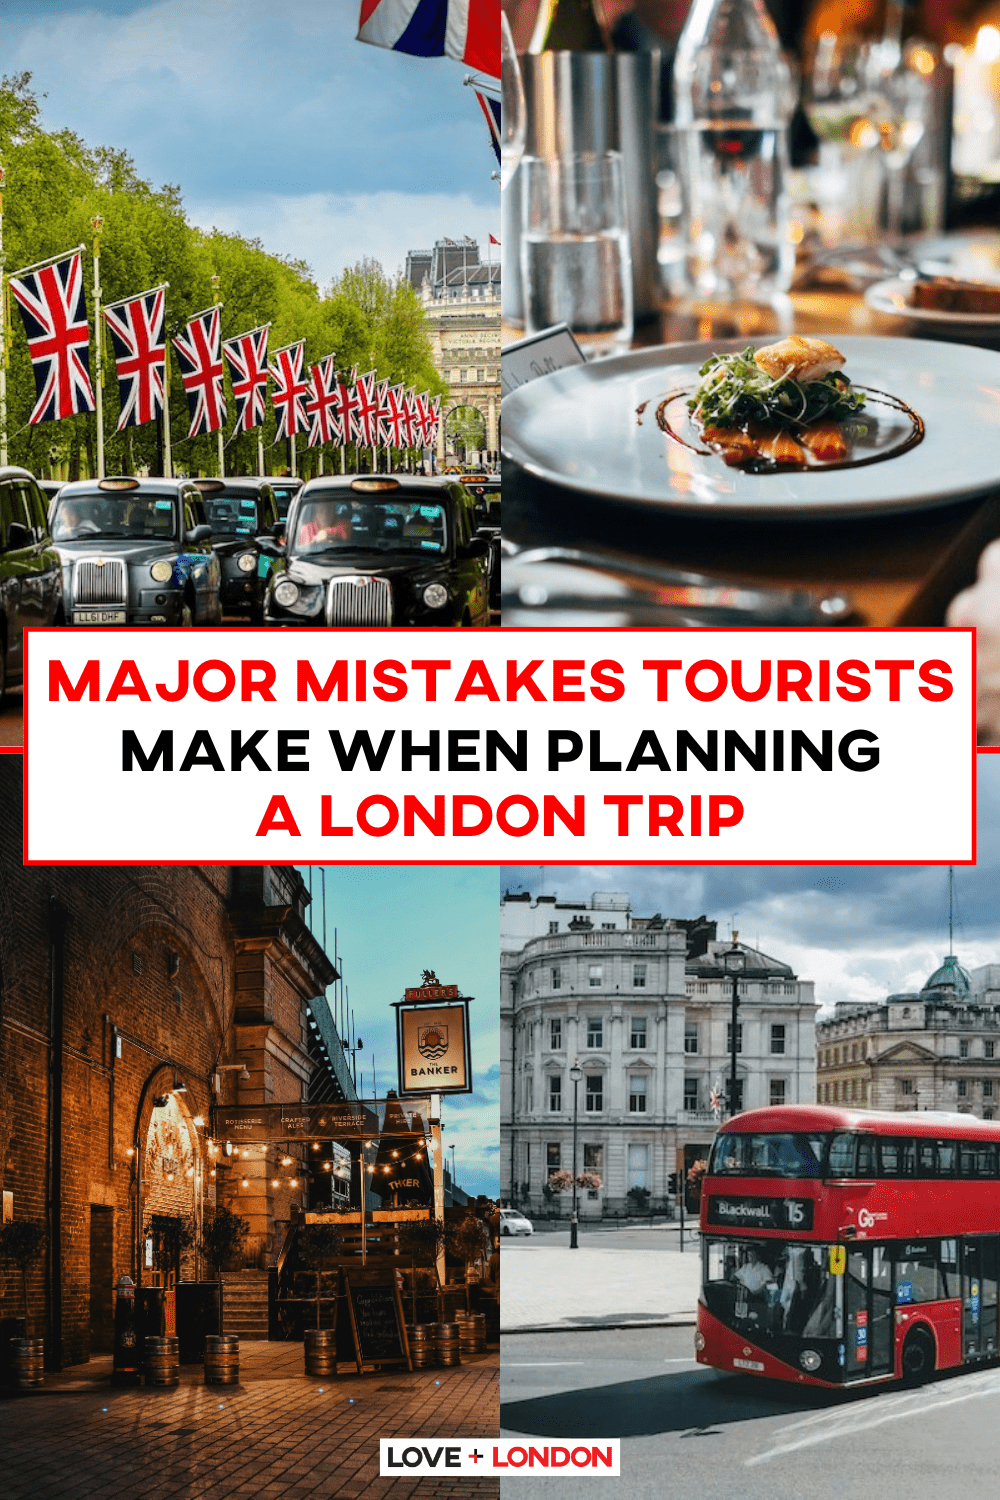 This is a Pinterest pin of the major mistakes tourists make in London